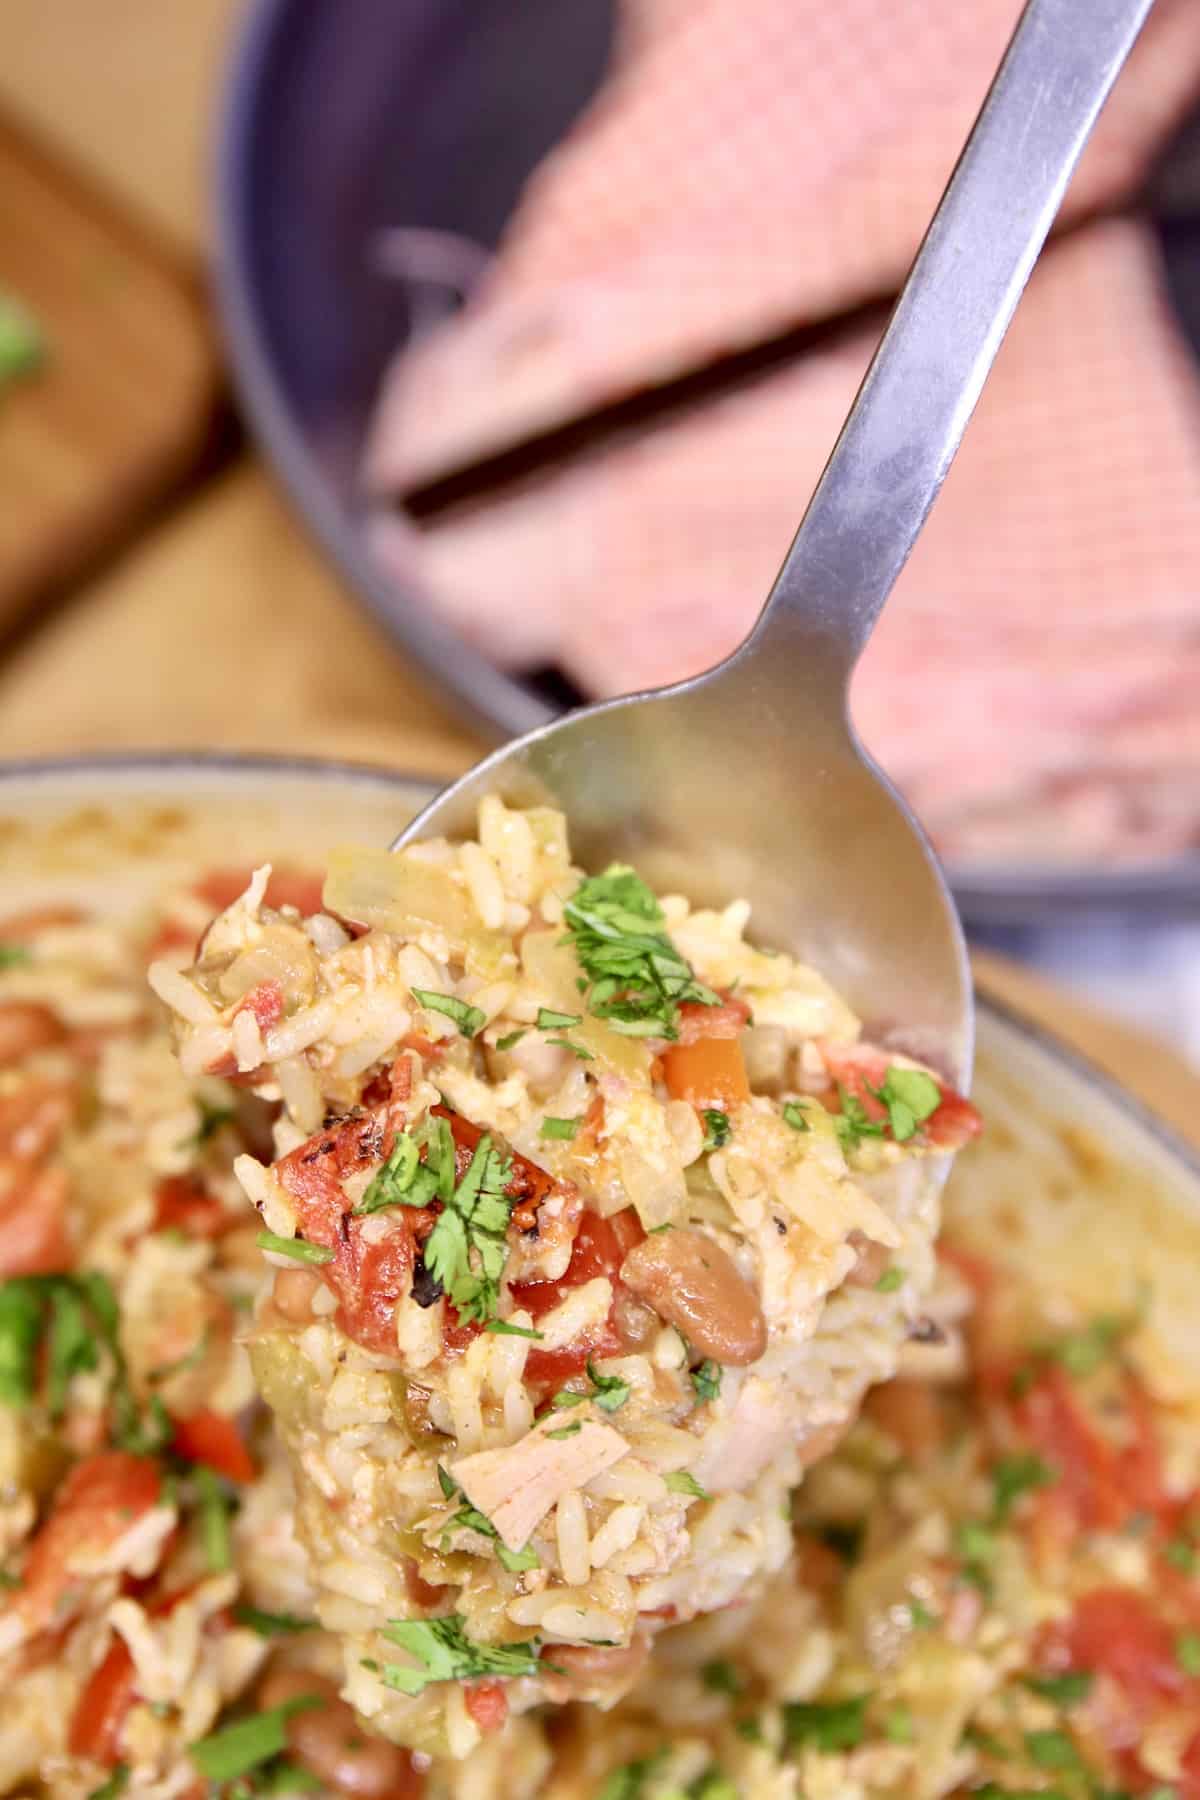 Spoonful of Spanish Chicken and Rice.